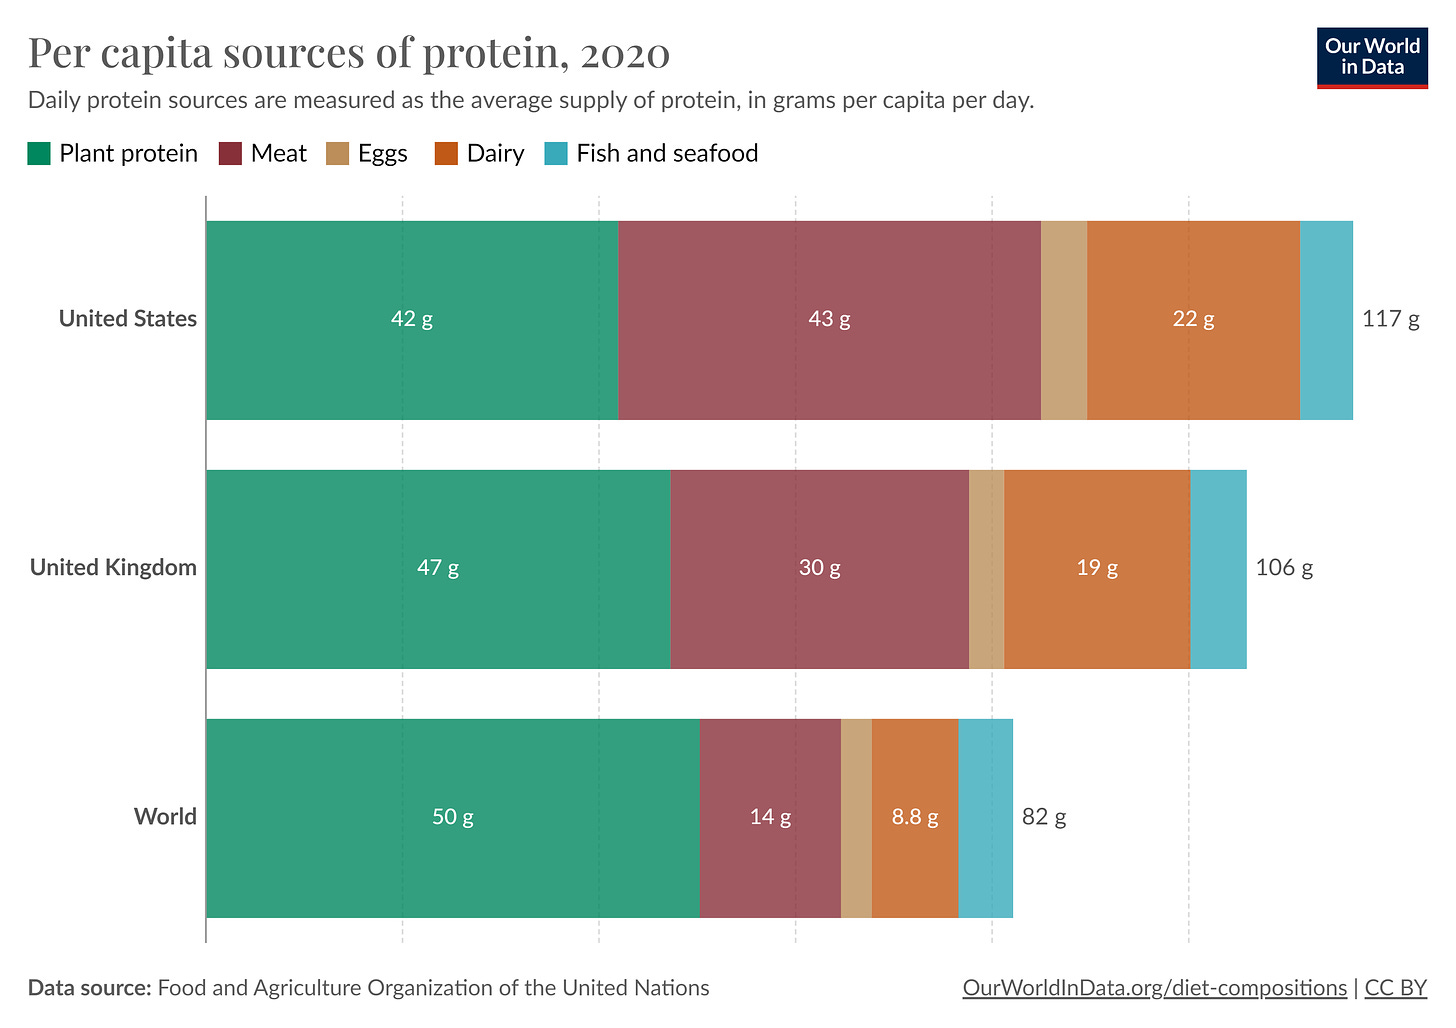 Figure E - World, UK and US per capita sources of protein